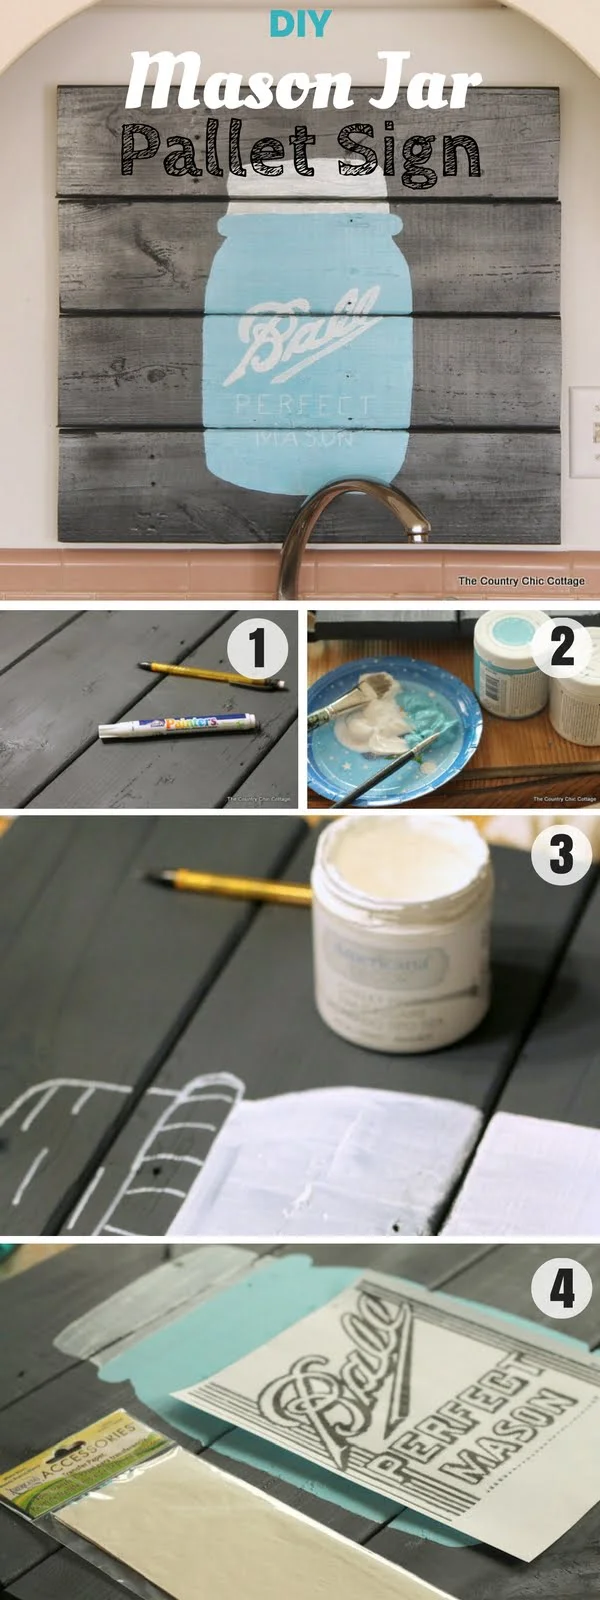 17 Fab DIY Farmhouse Signs You Can Make Yourself - Check out how to make easy DIY Mason Jar Pallet Sign